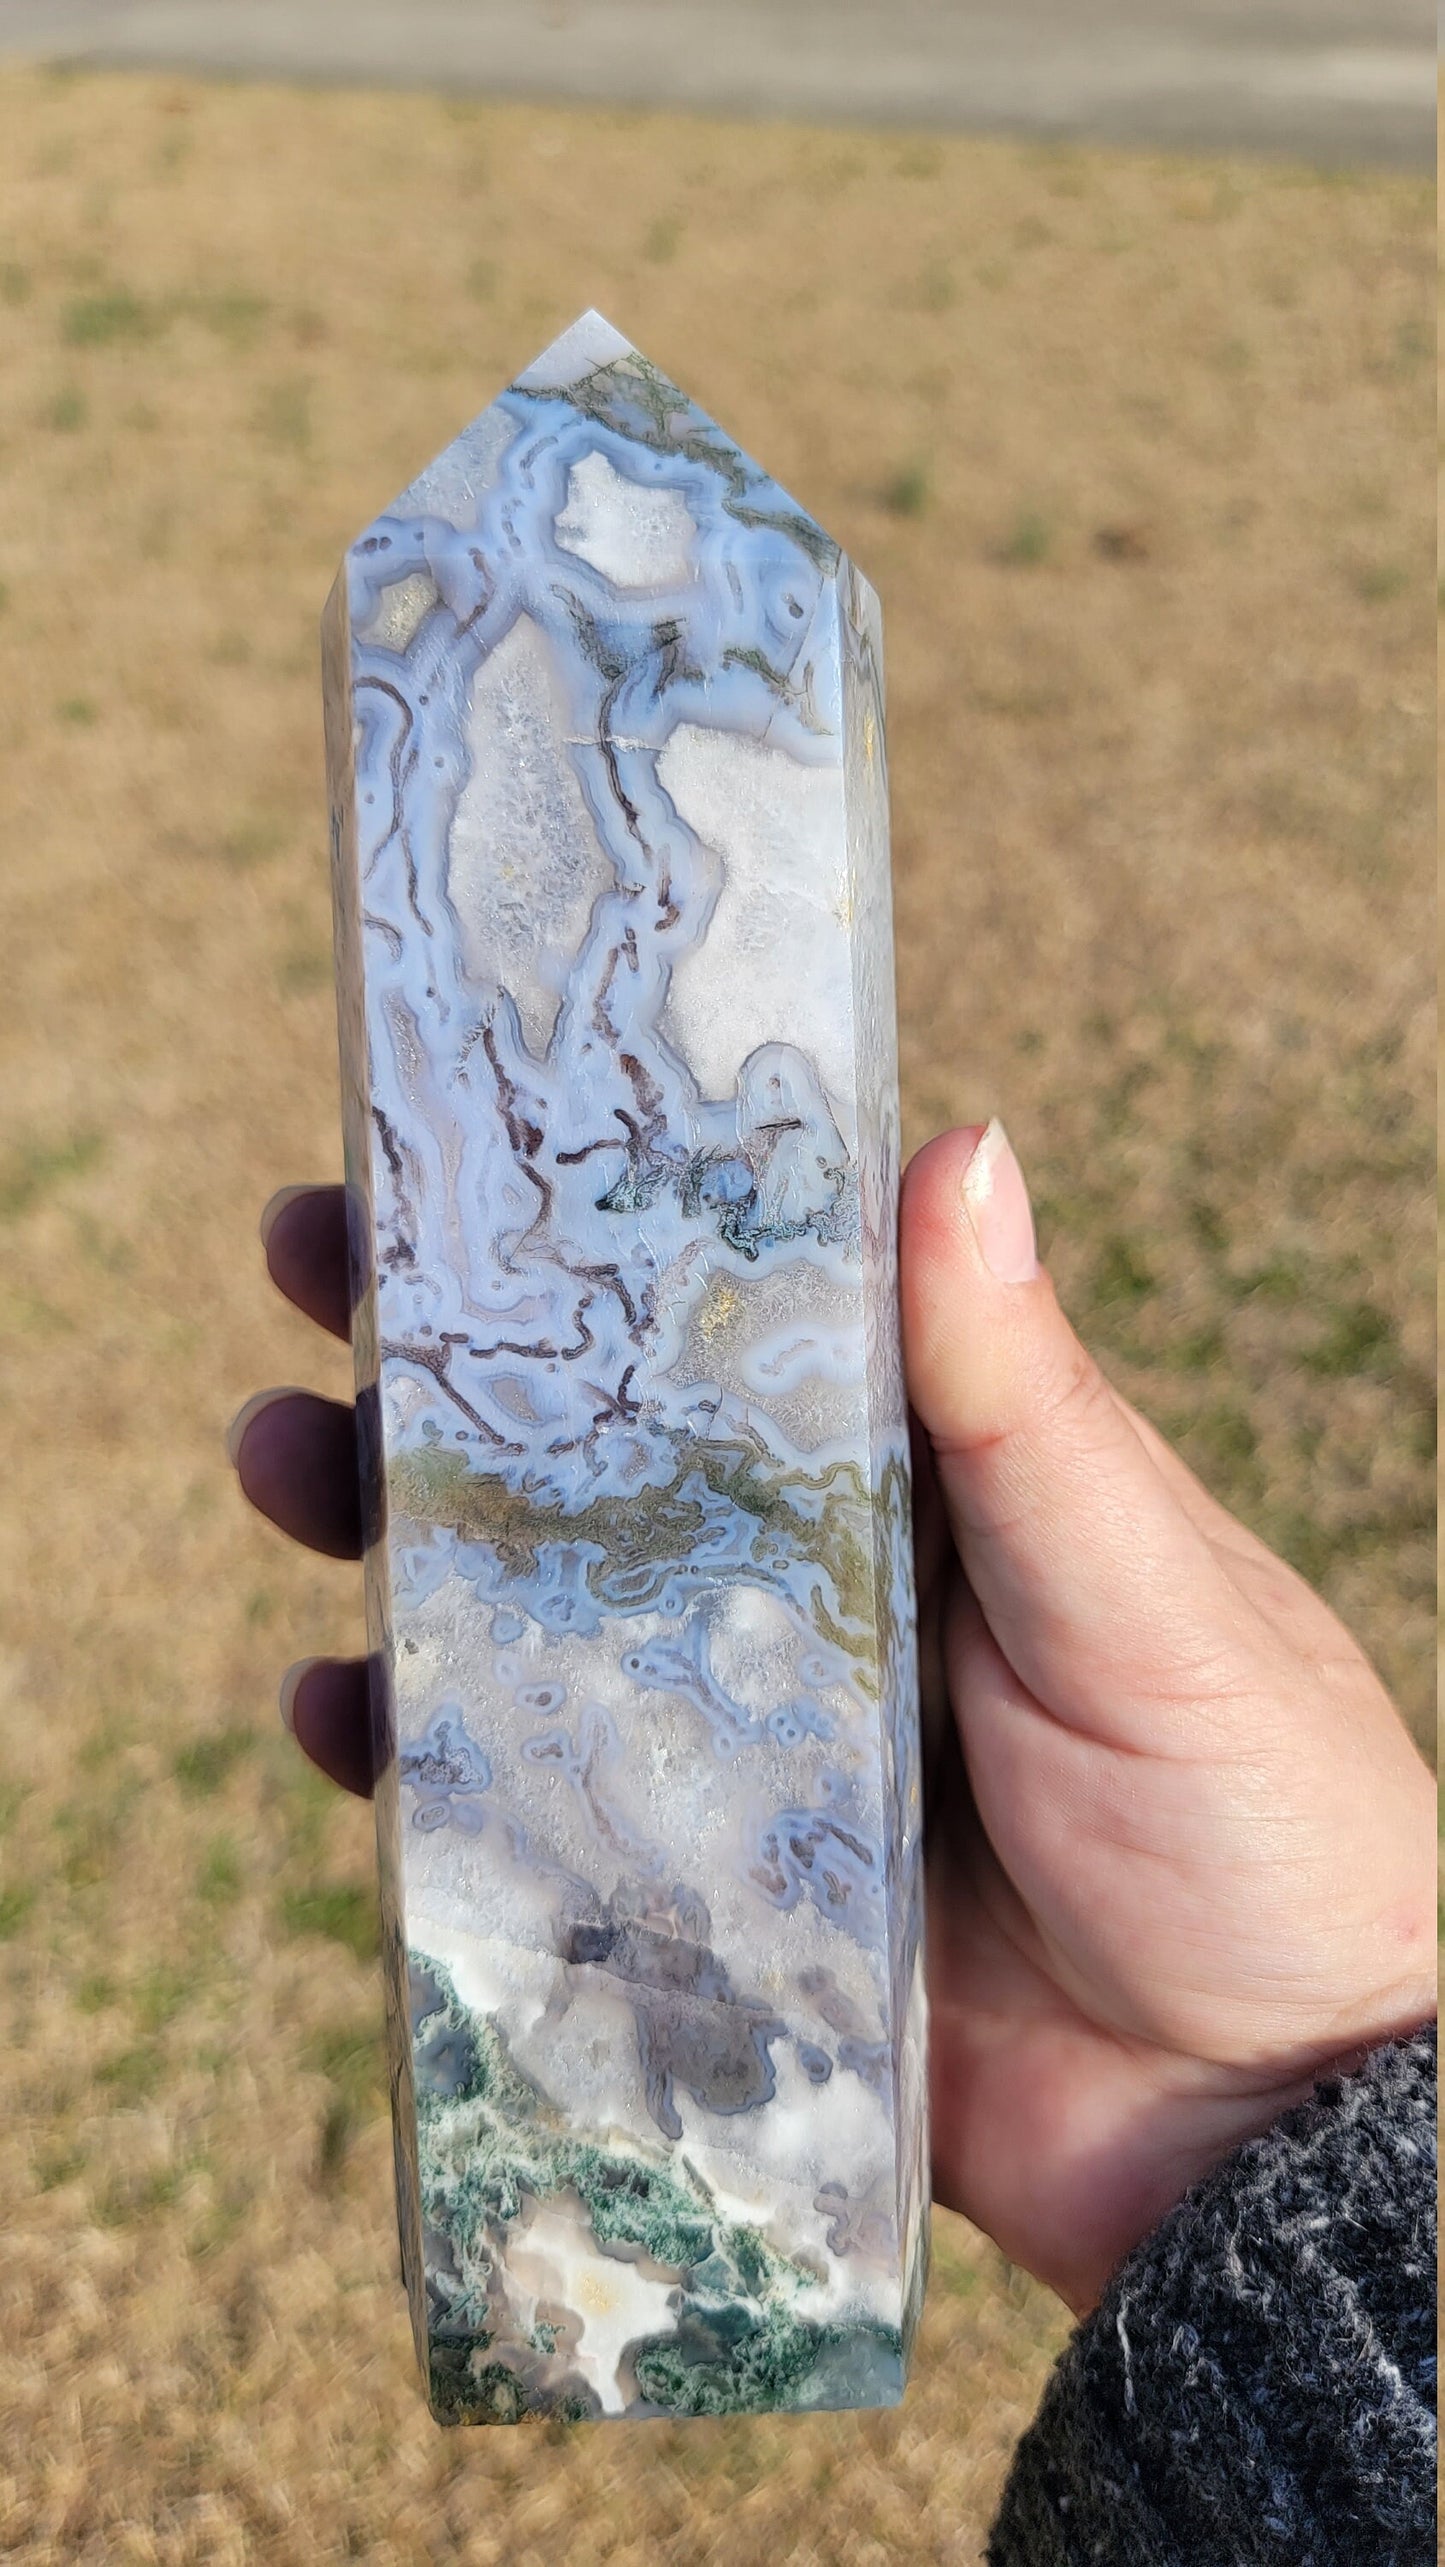 Moss Agate with Blue Chalcedony and Calcite.